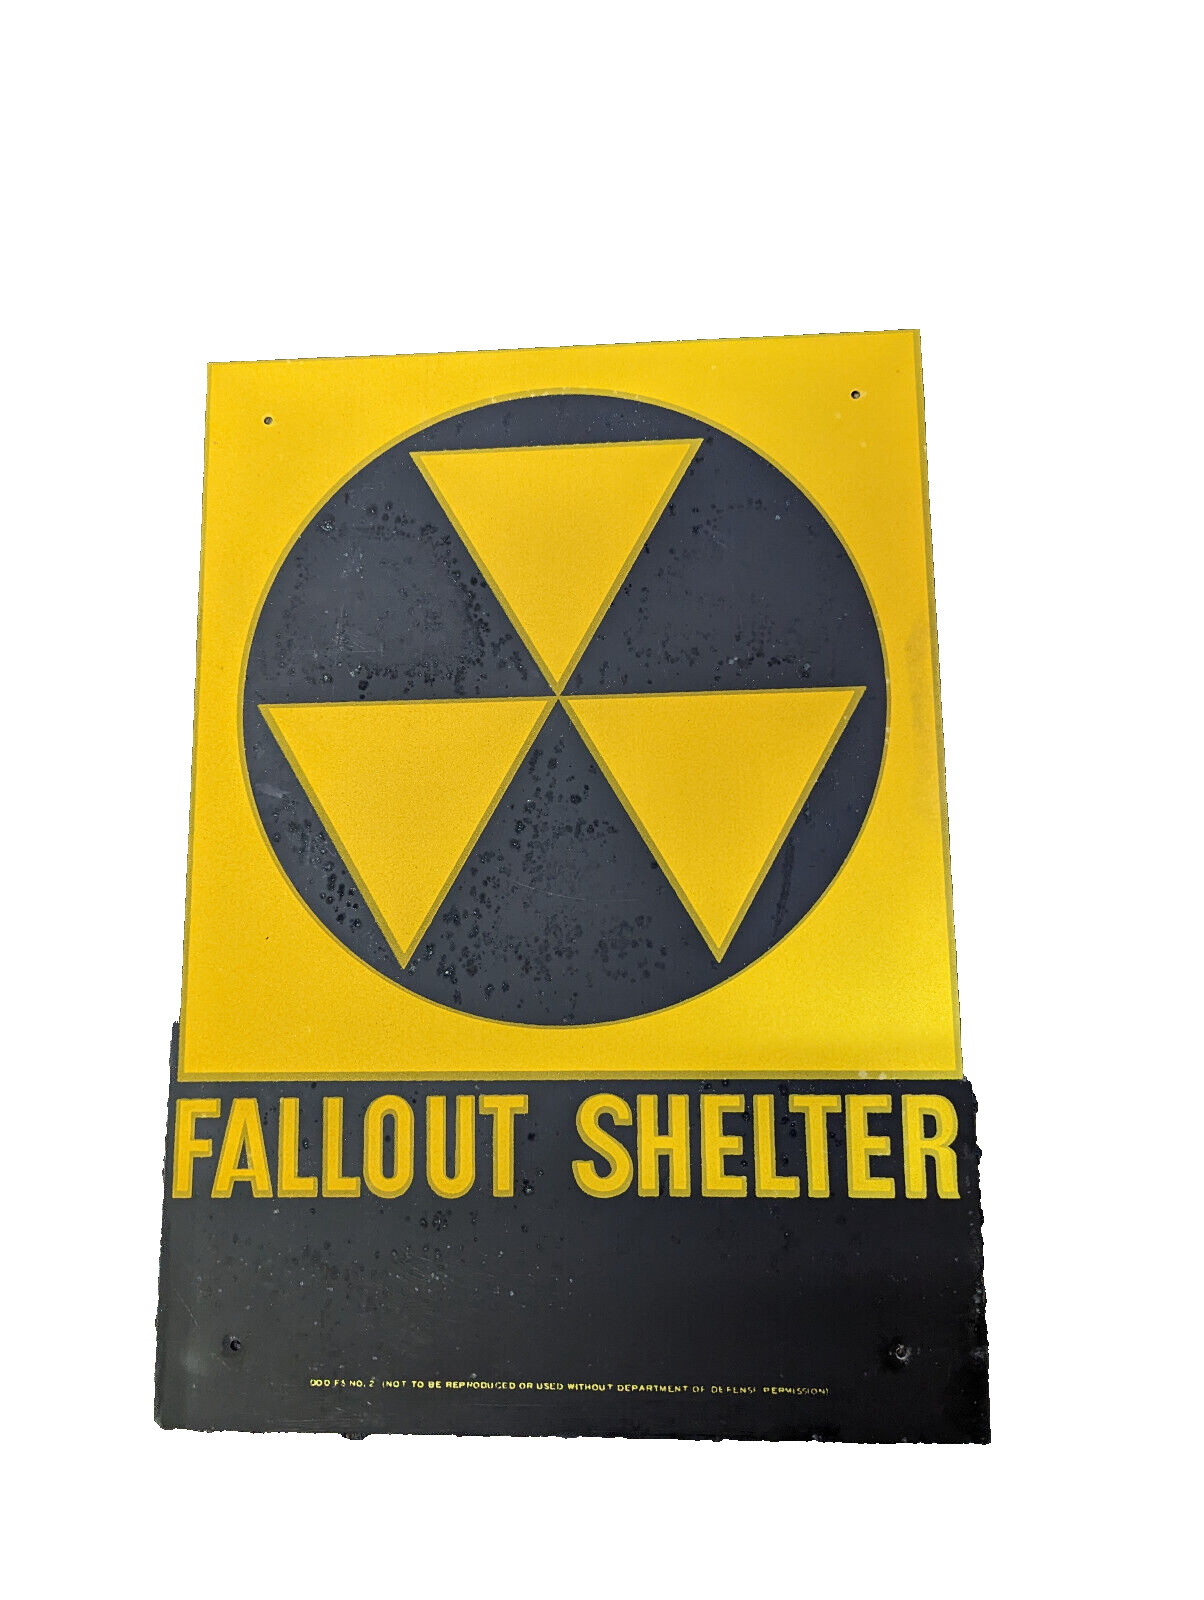 $27 Fallout shelter sign original not a reproduction